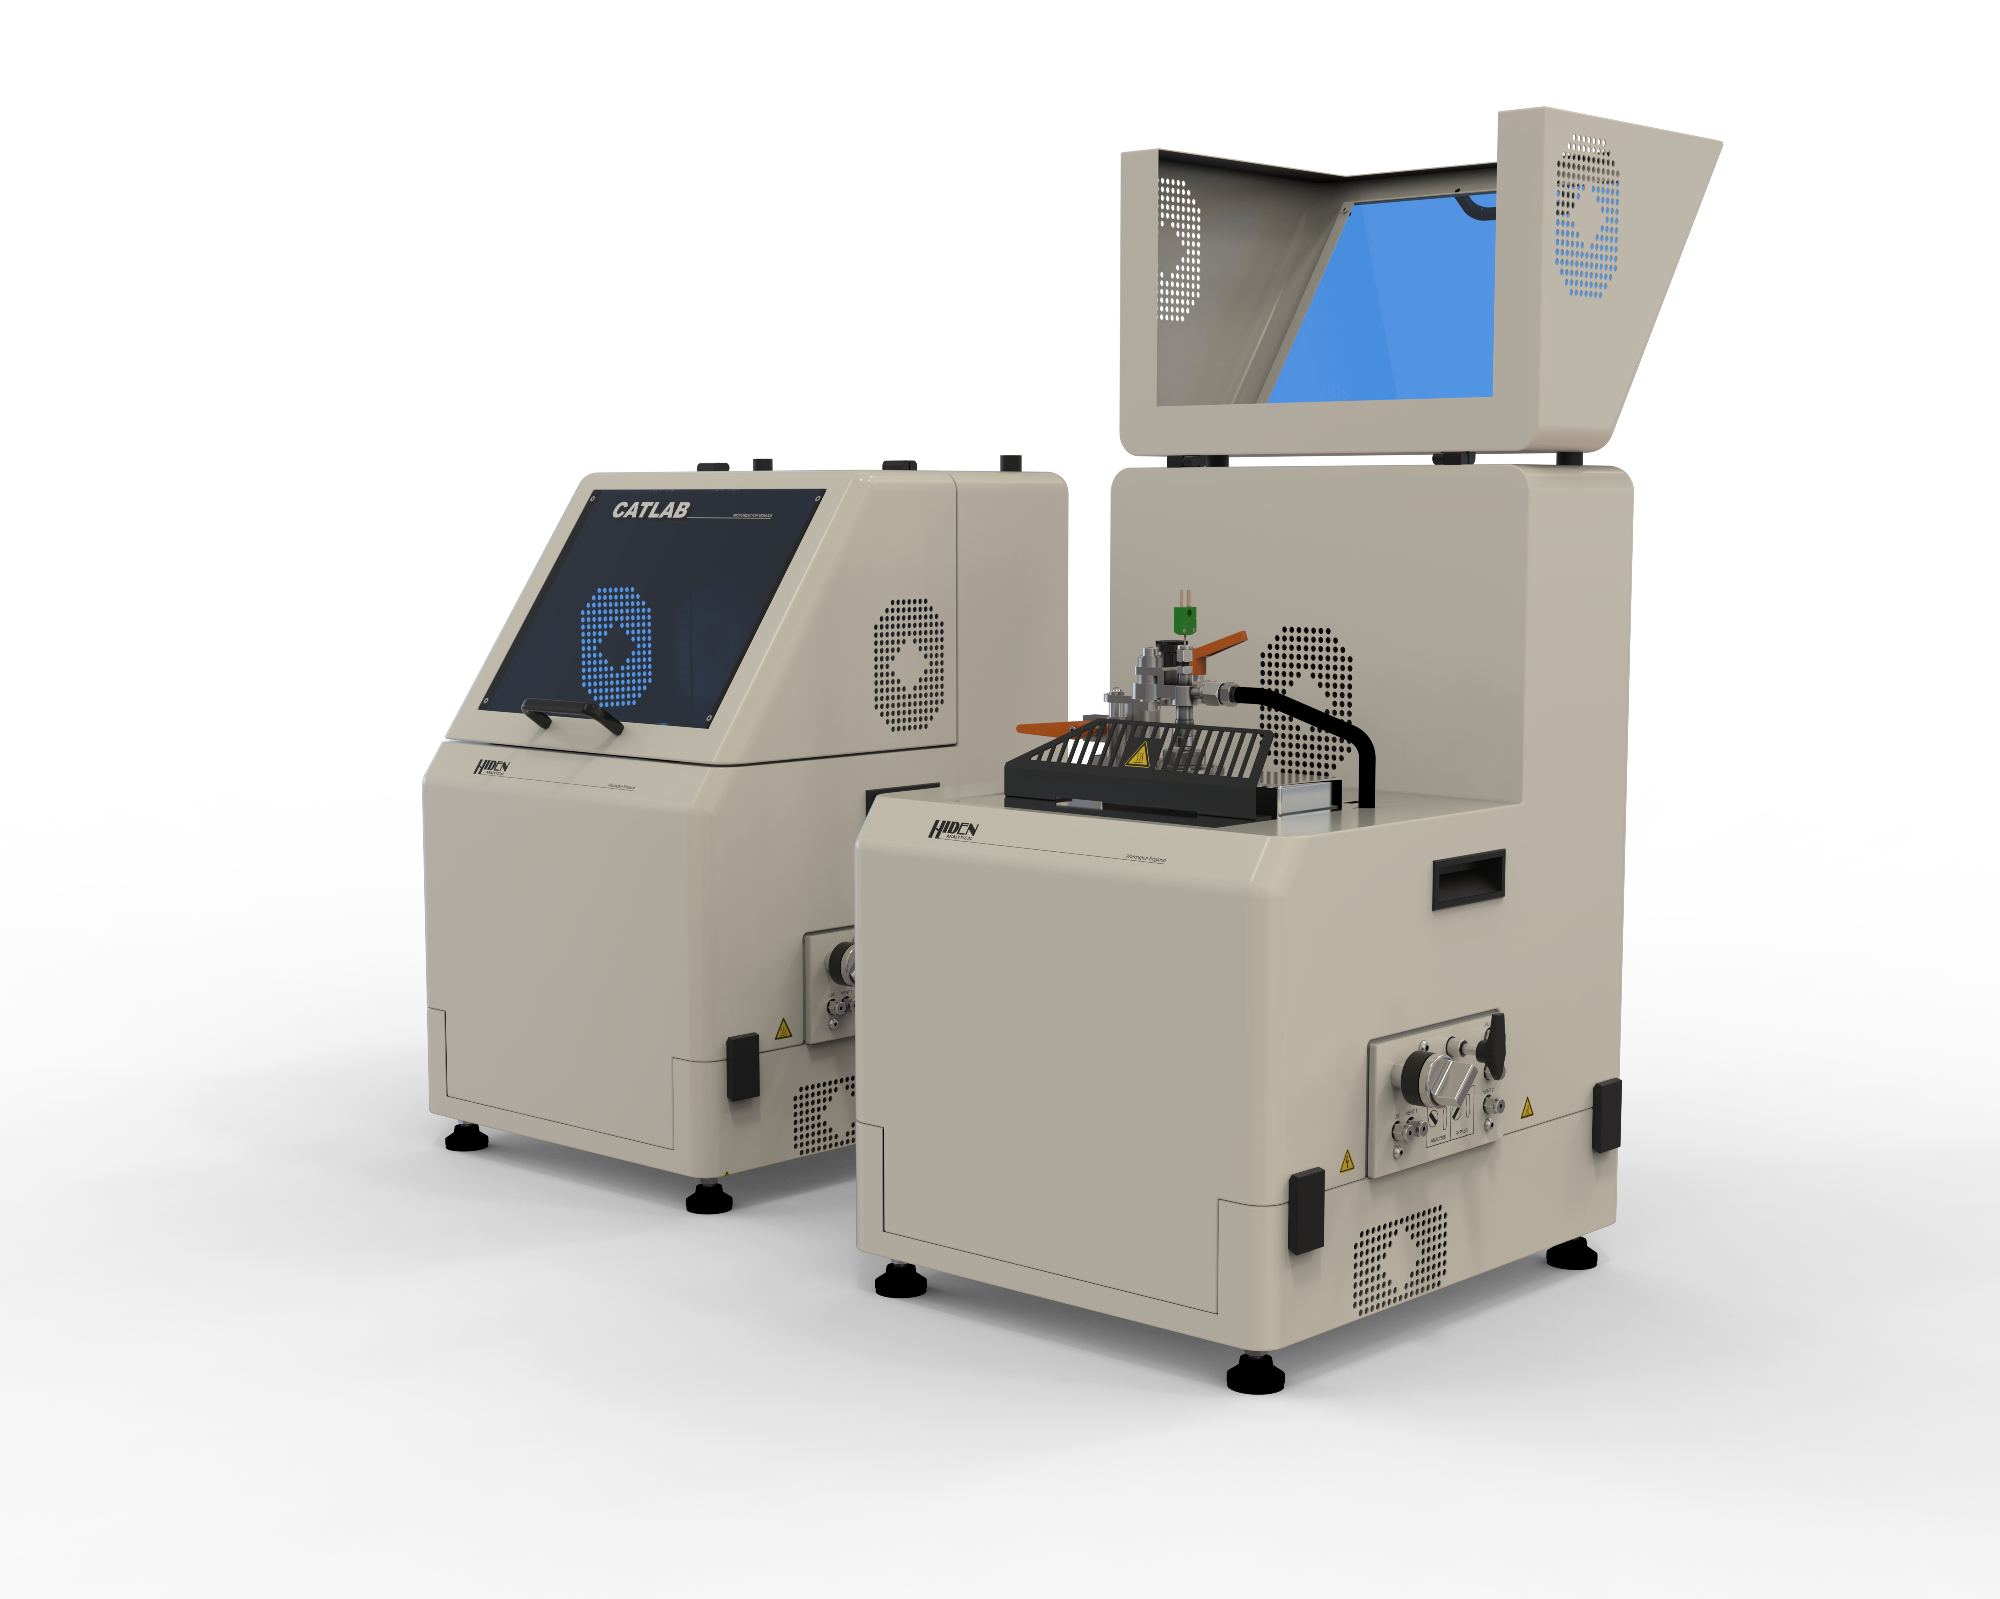 CATLAB: Catalyst Characterization, Kinetic and Thermodynamic Measurements System